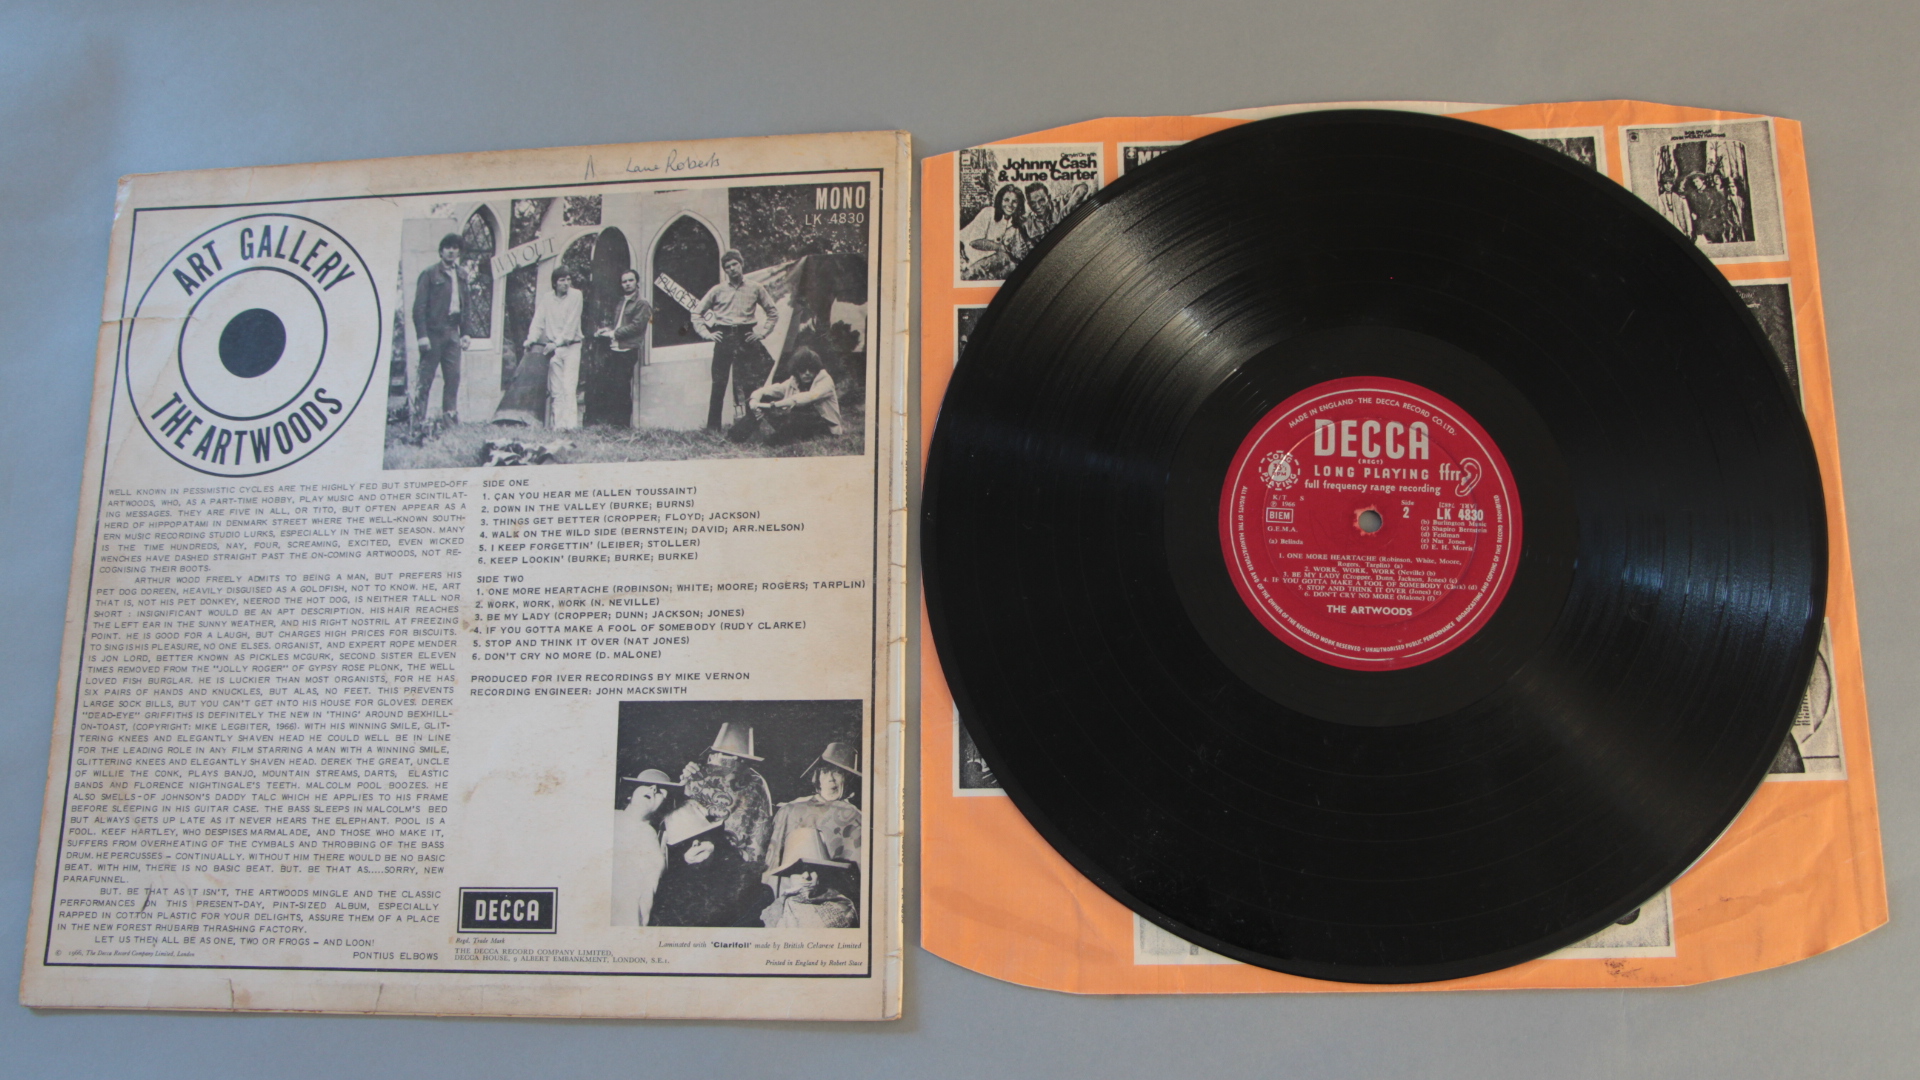 Artwoods Art Gallery 1966 DECCA LK 4830 LP red/ silver label with unboxed Decca and 'FFrr' laminated - Image 2 of 2